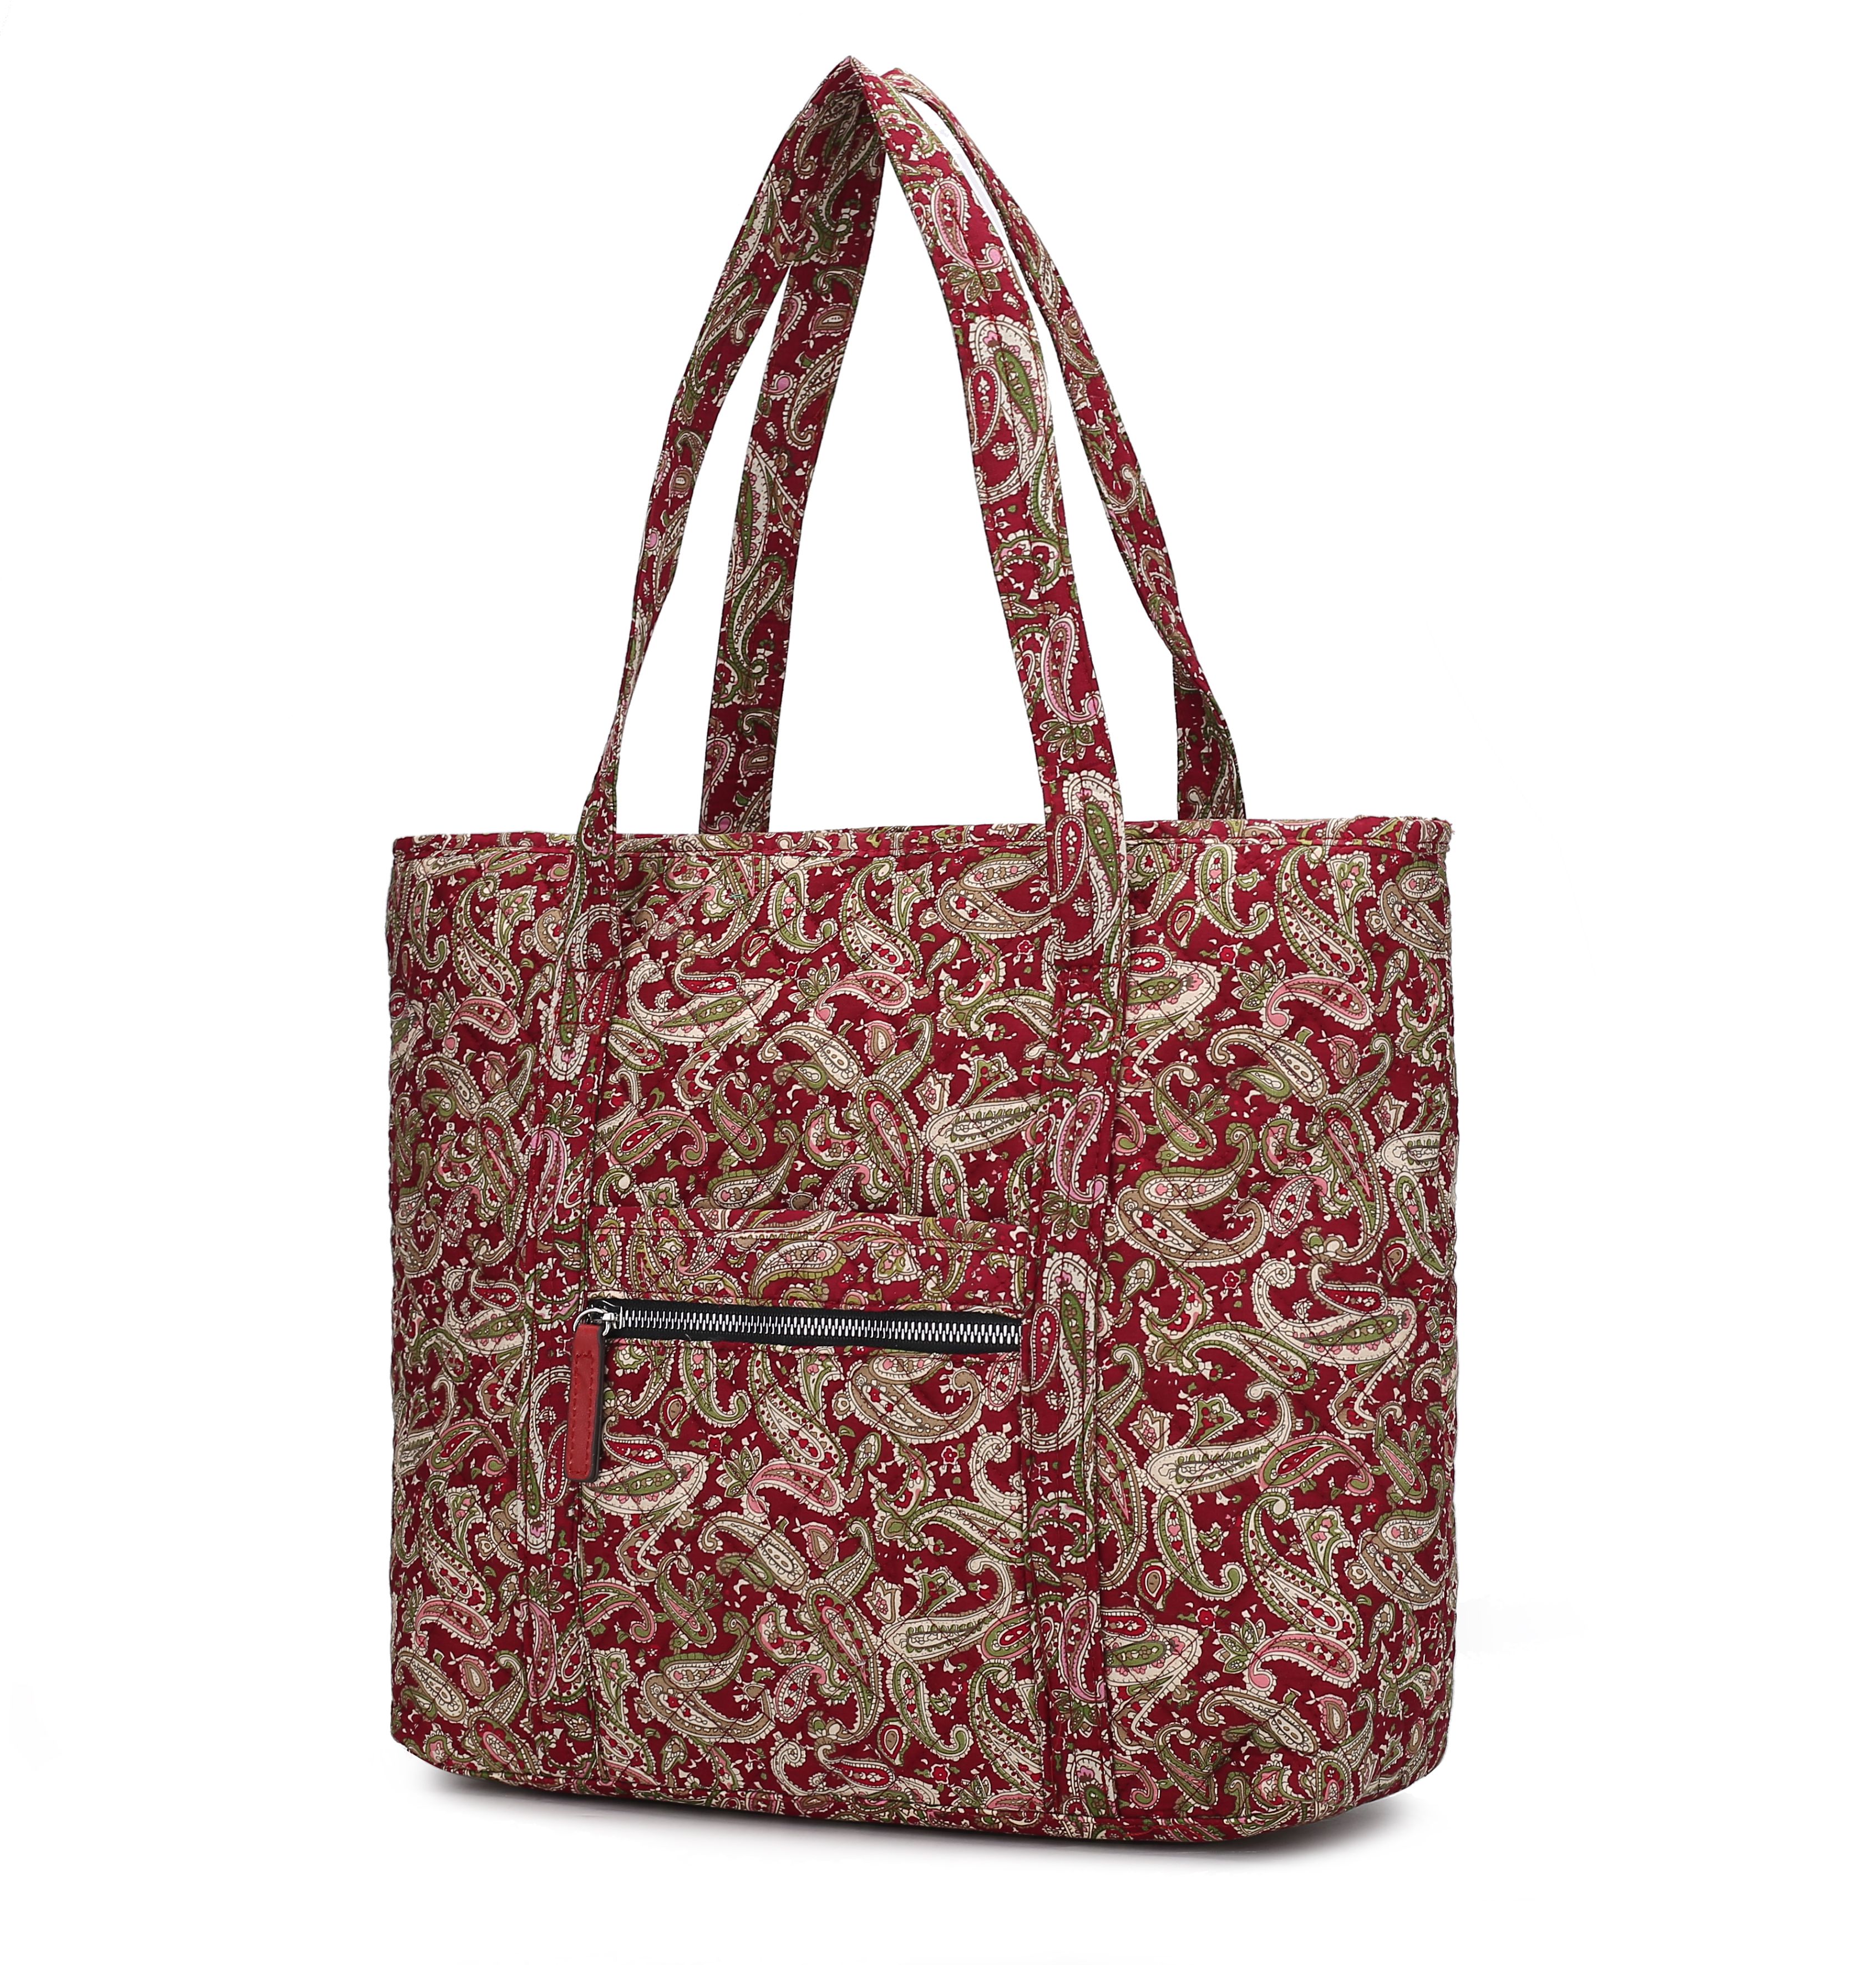 MKF Collection Rena Quilted Tote Bag By Mia K.- Burgundy Paisley - image 1 of 2